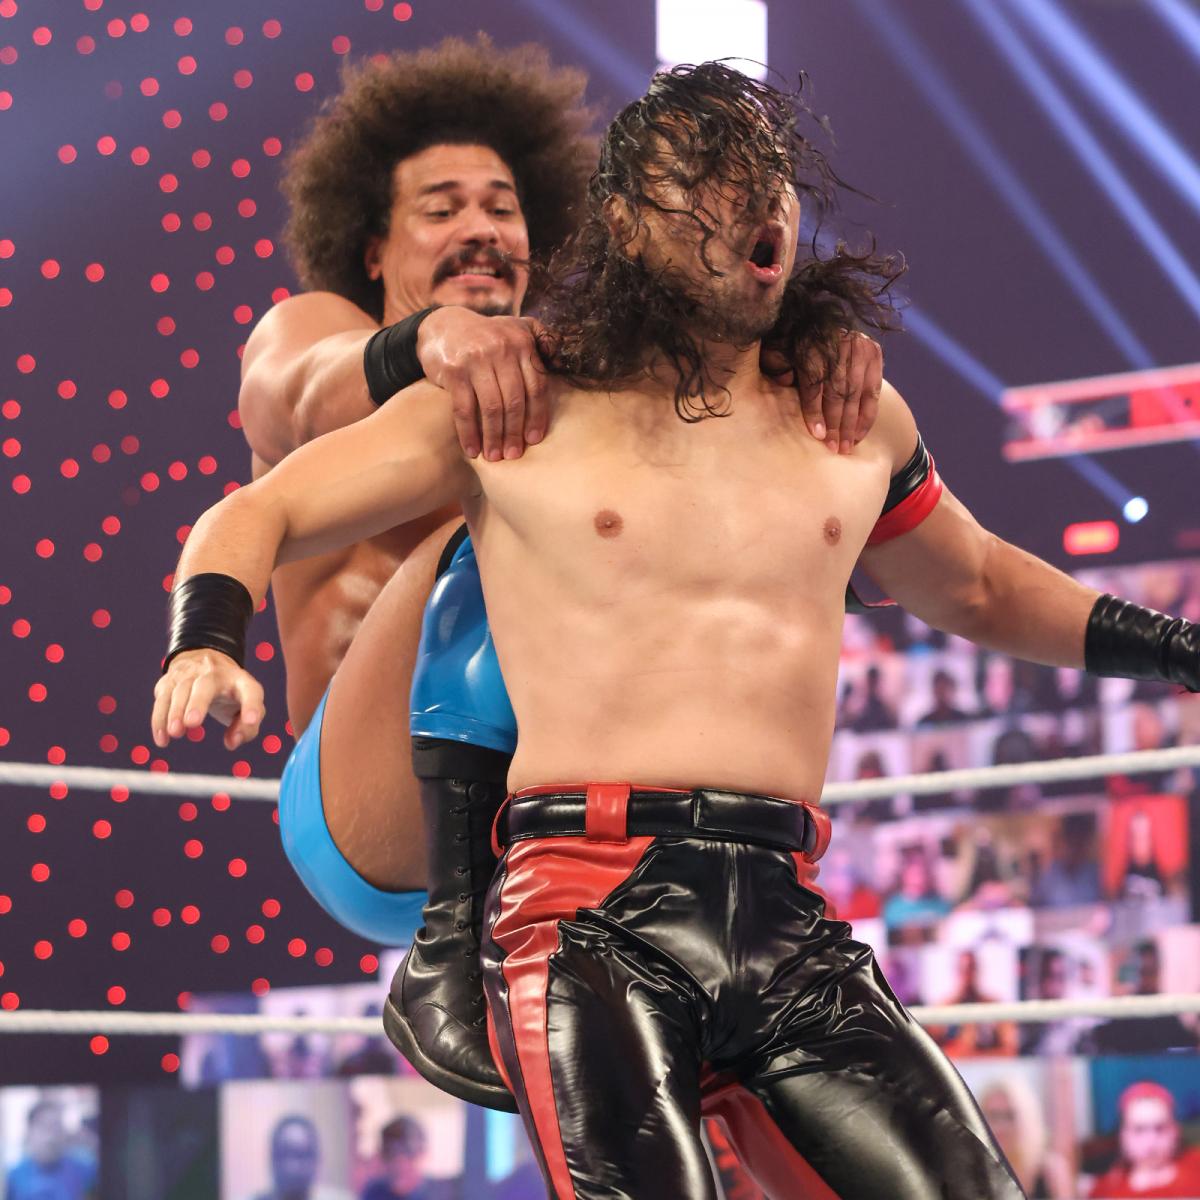 Is Carlito returning to WWE for good after epic body transformation?